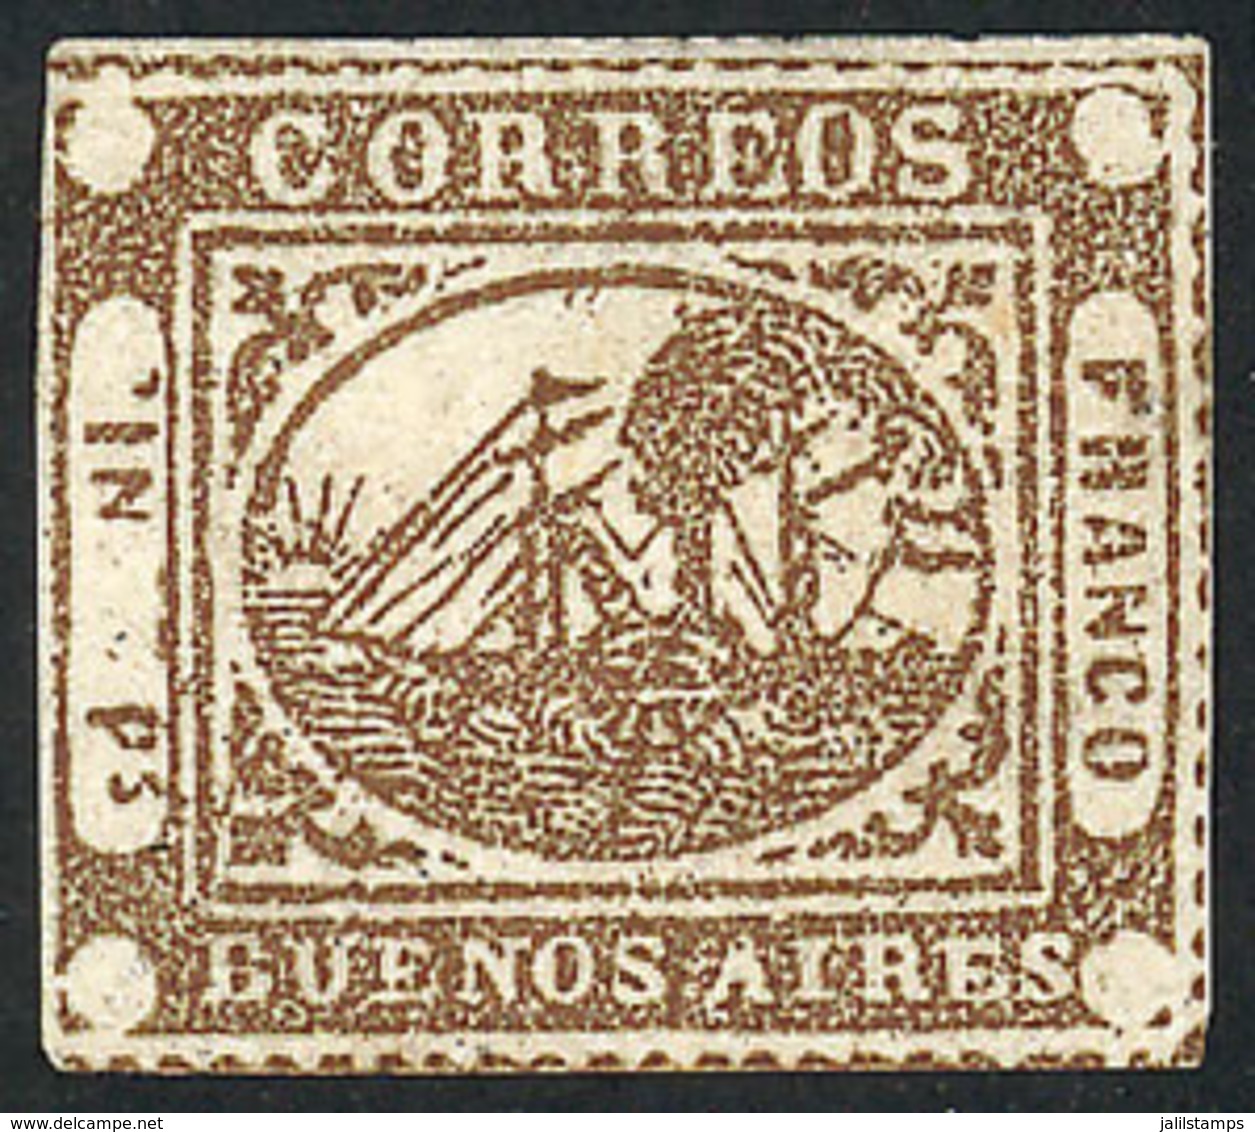 102 ARGENTINA: GJ.10, IN Ps. Dun, Mint, Oily And Very Clear Impression, Very Fresh, - Buenos Aires (1858-1864)